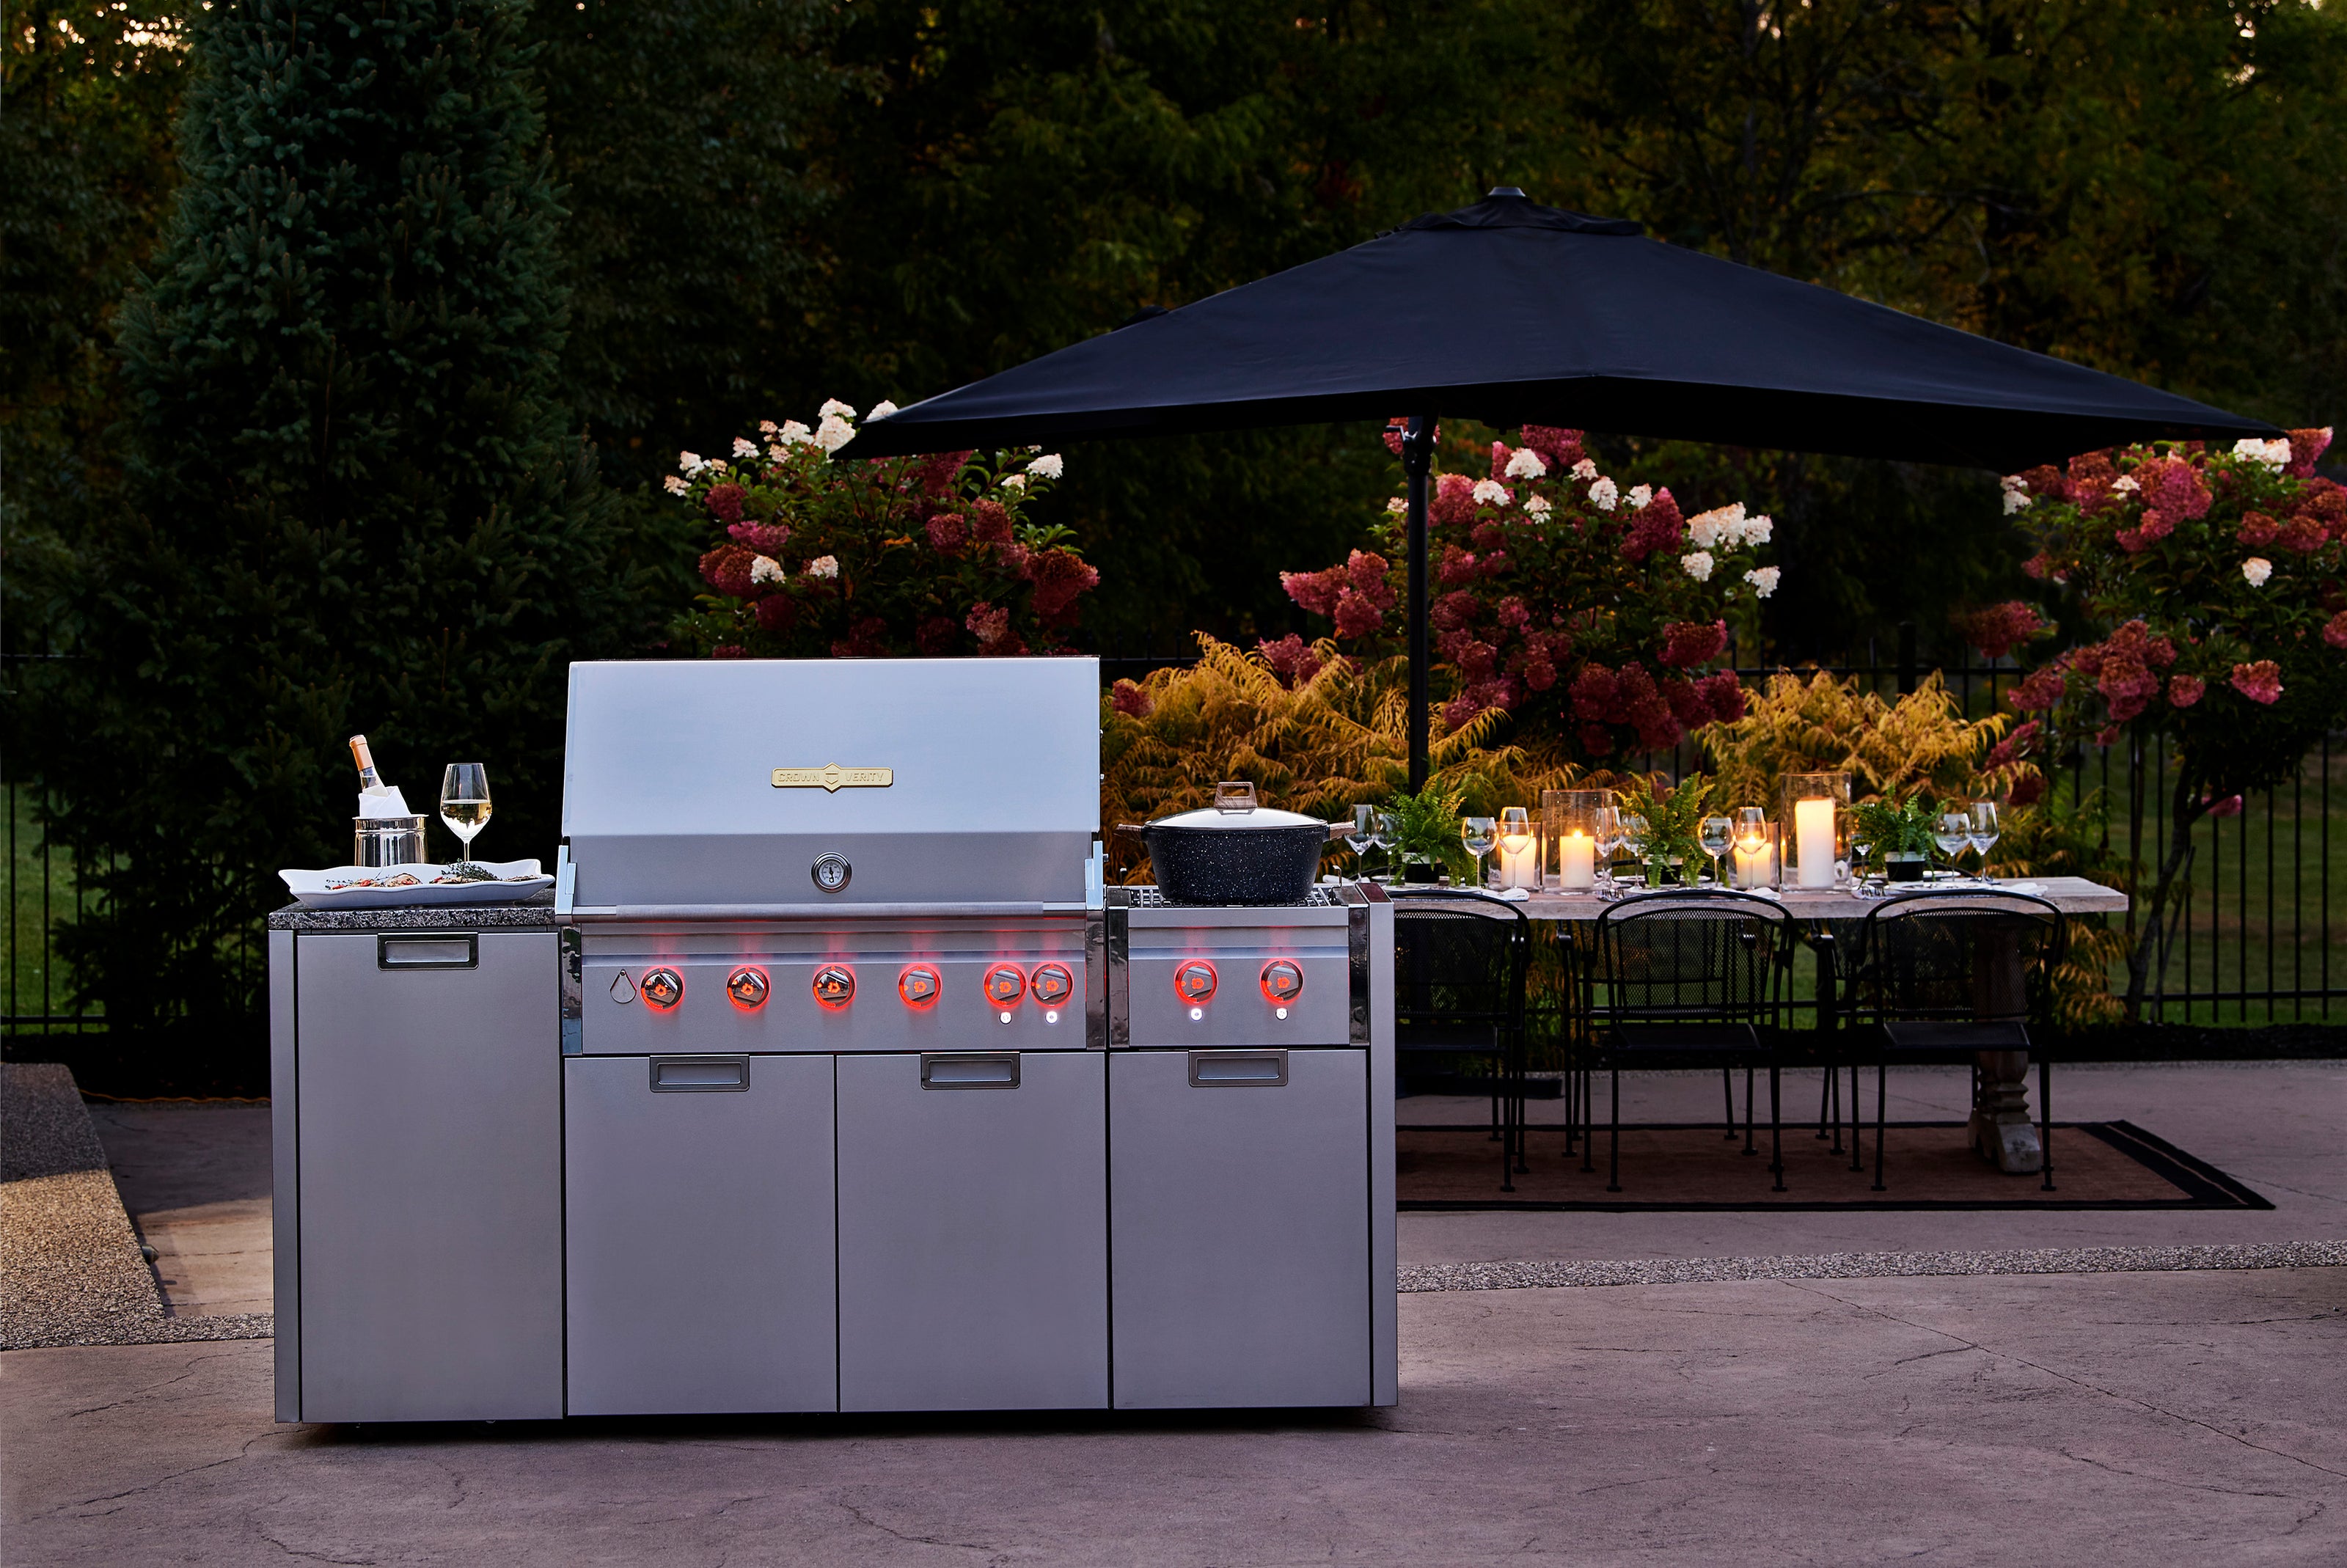 Canadian-made Crown Verity Grills Infinite Series in Backyard Lifestyle Photo at Barbecues Galore